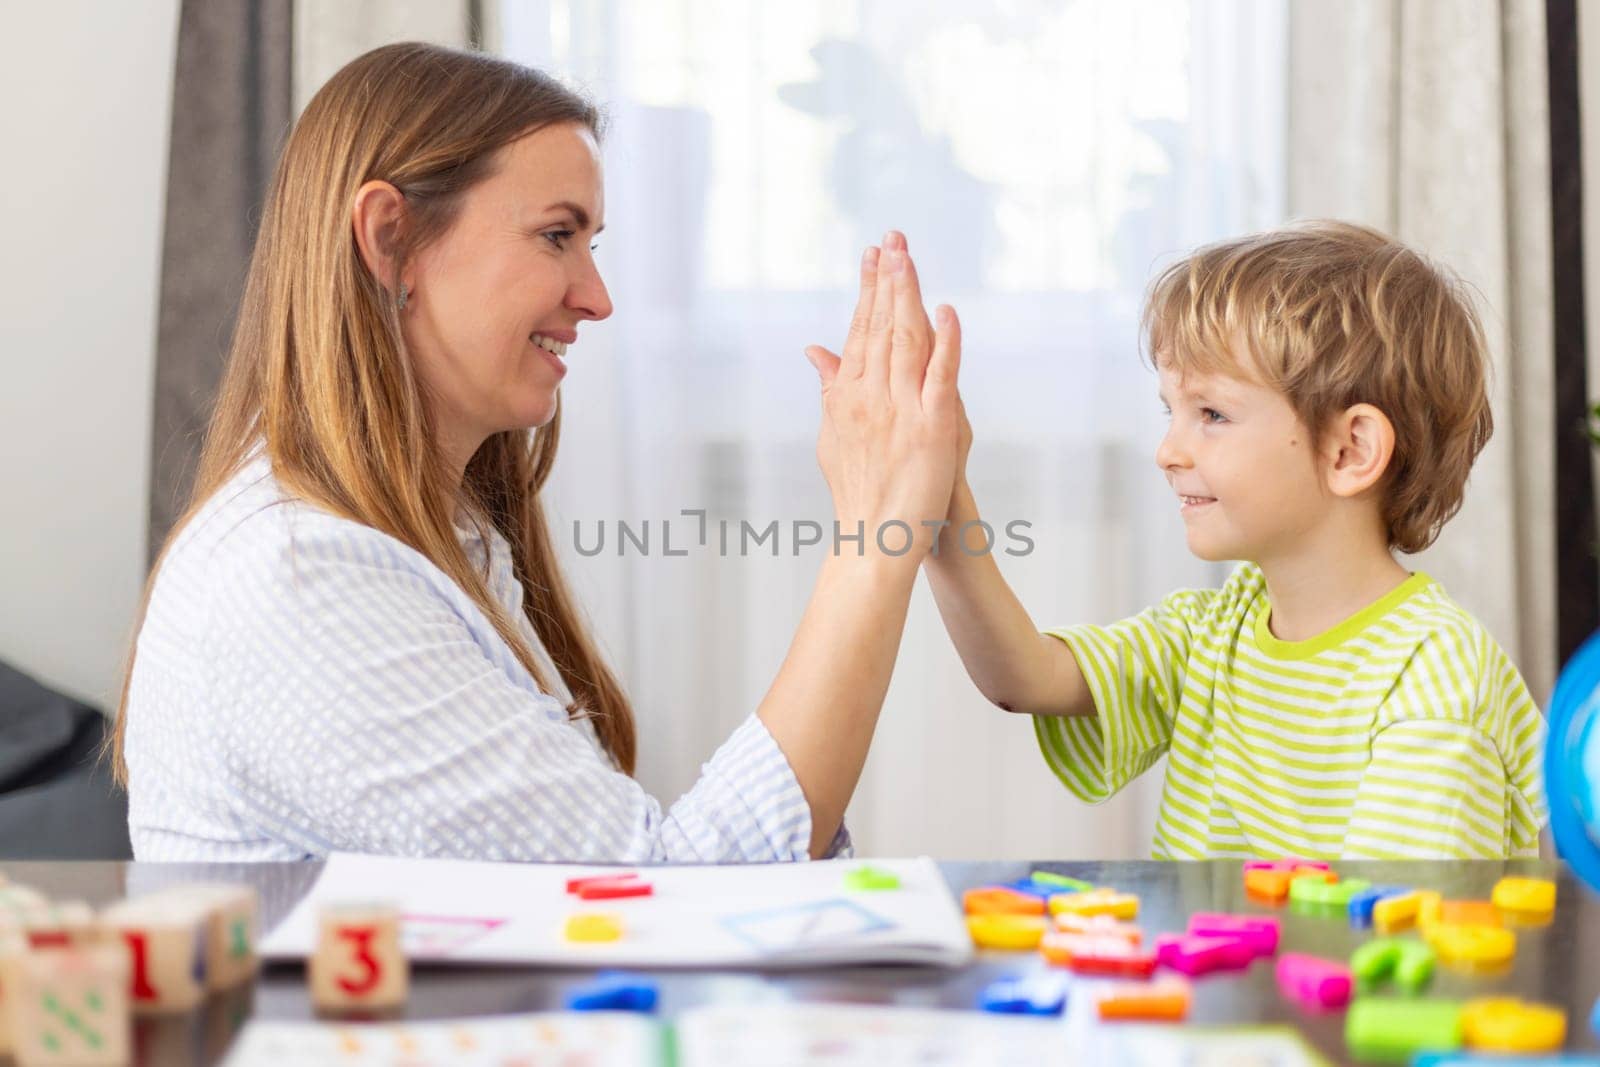 High Five in a Children's Educational Setting by andreyz